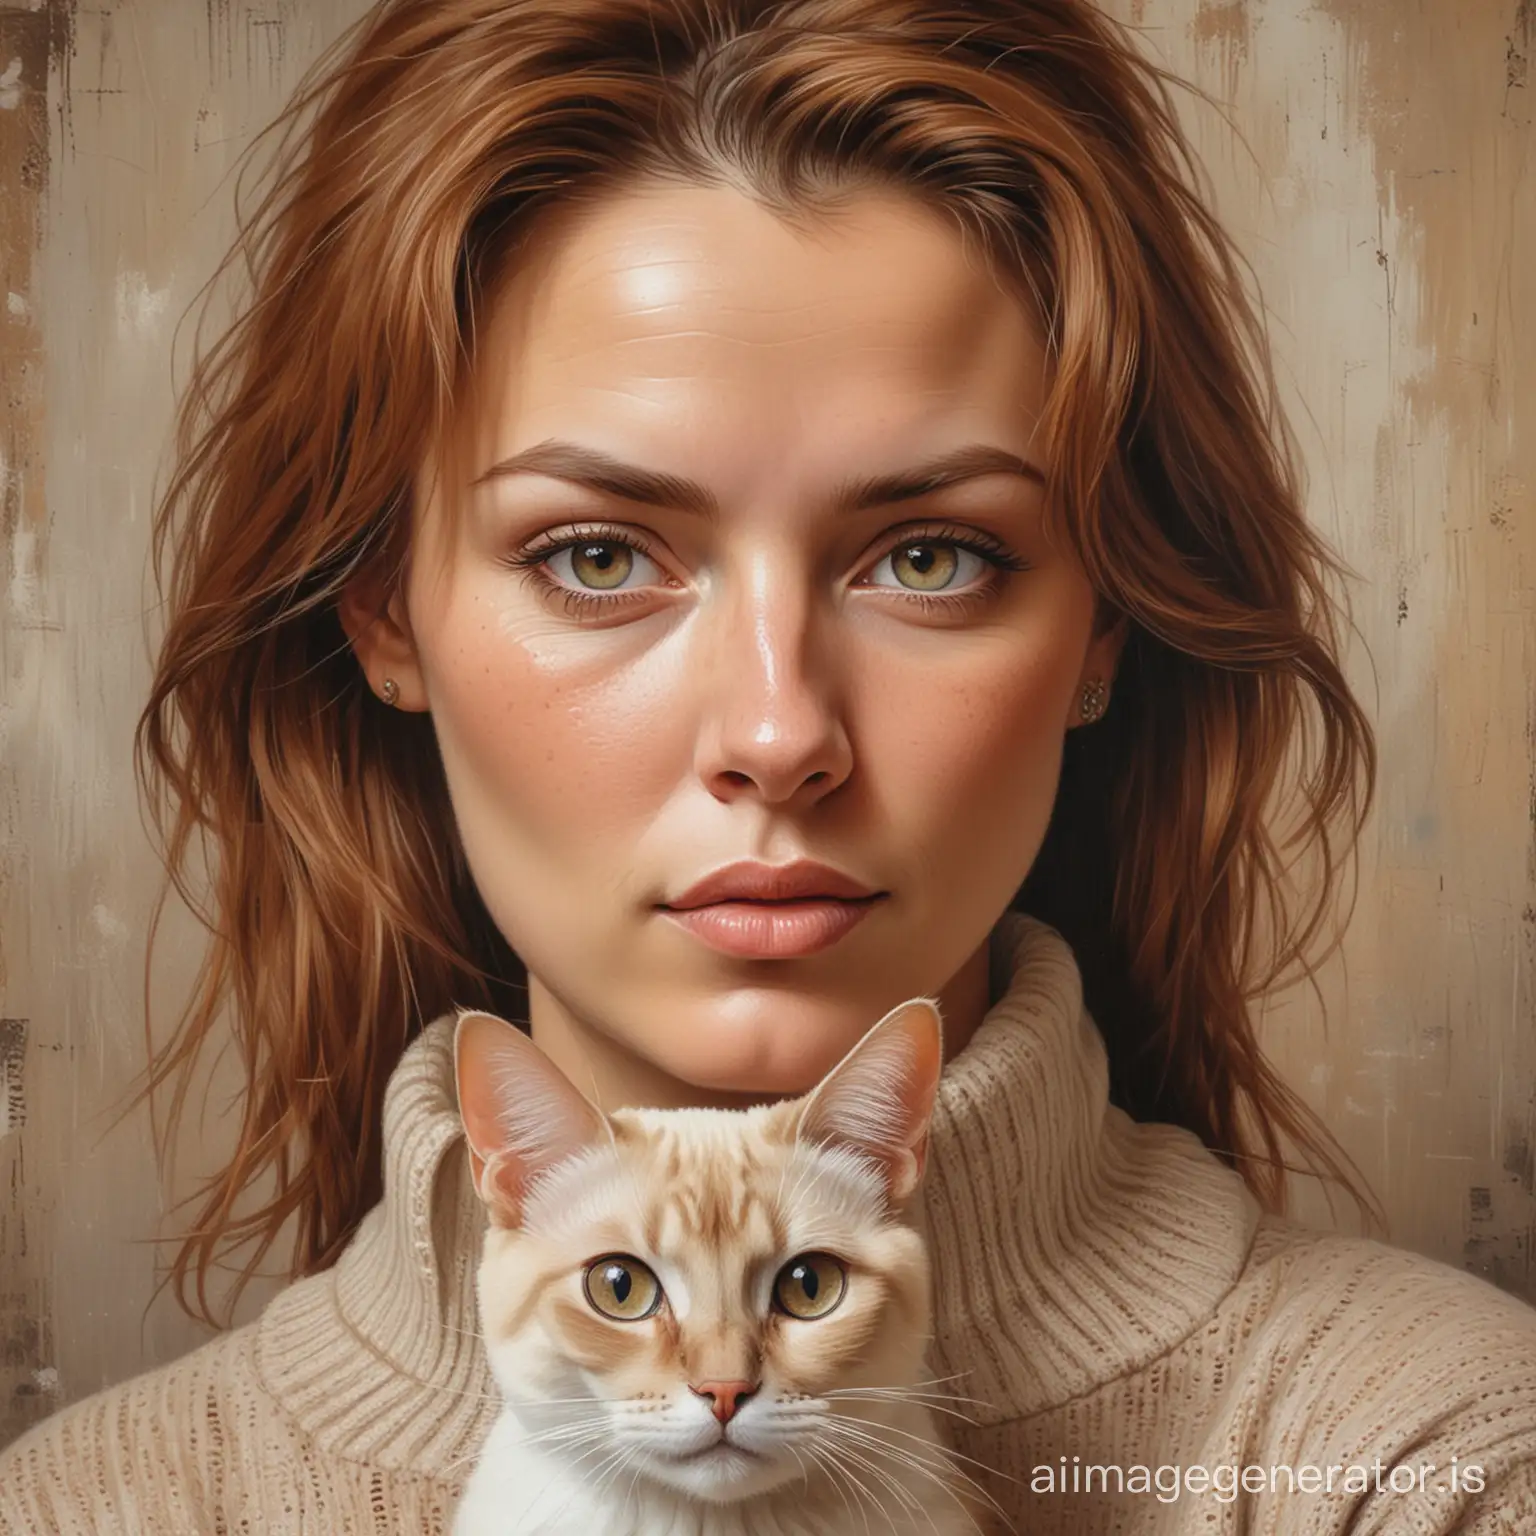 A textured oil painting, an elegant woman, eye pupil, 55, from the 90s, always facing the viewer, is depicted with a chestnut-colored hairstyle and expressive eyes. Her cheeks have a hint of blush, and she wears a long-sleeved sweater that matches the fashion of the time, holds a small Siamese-Siamese cat, graffiti, conceptual art, painting, illustration